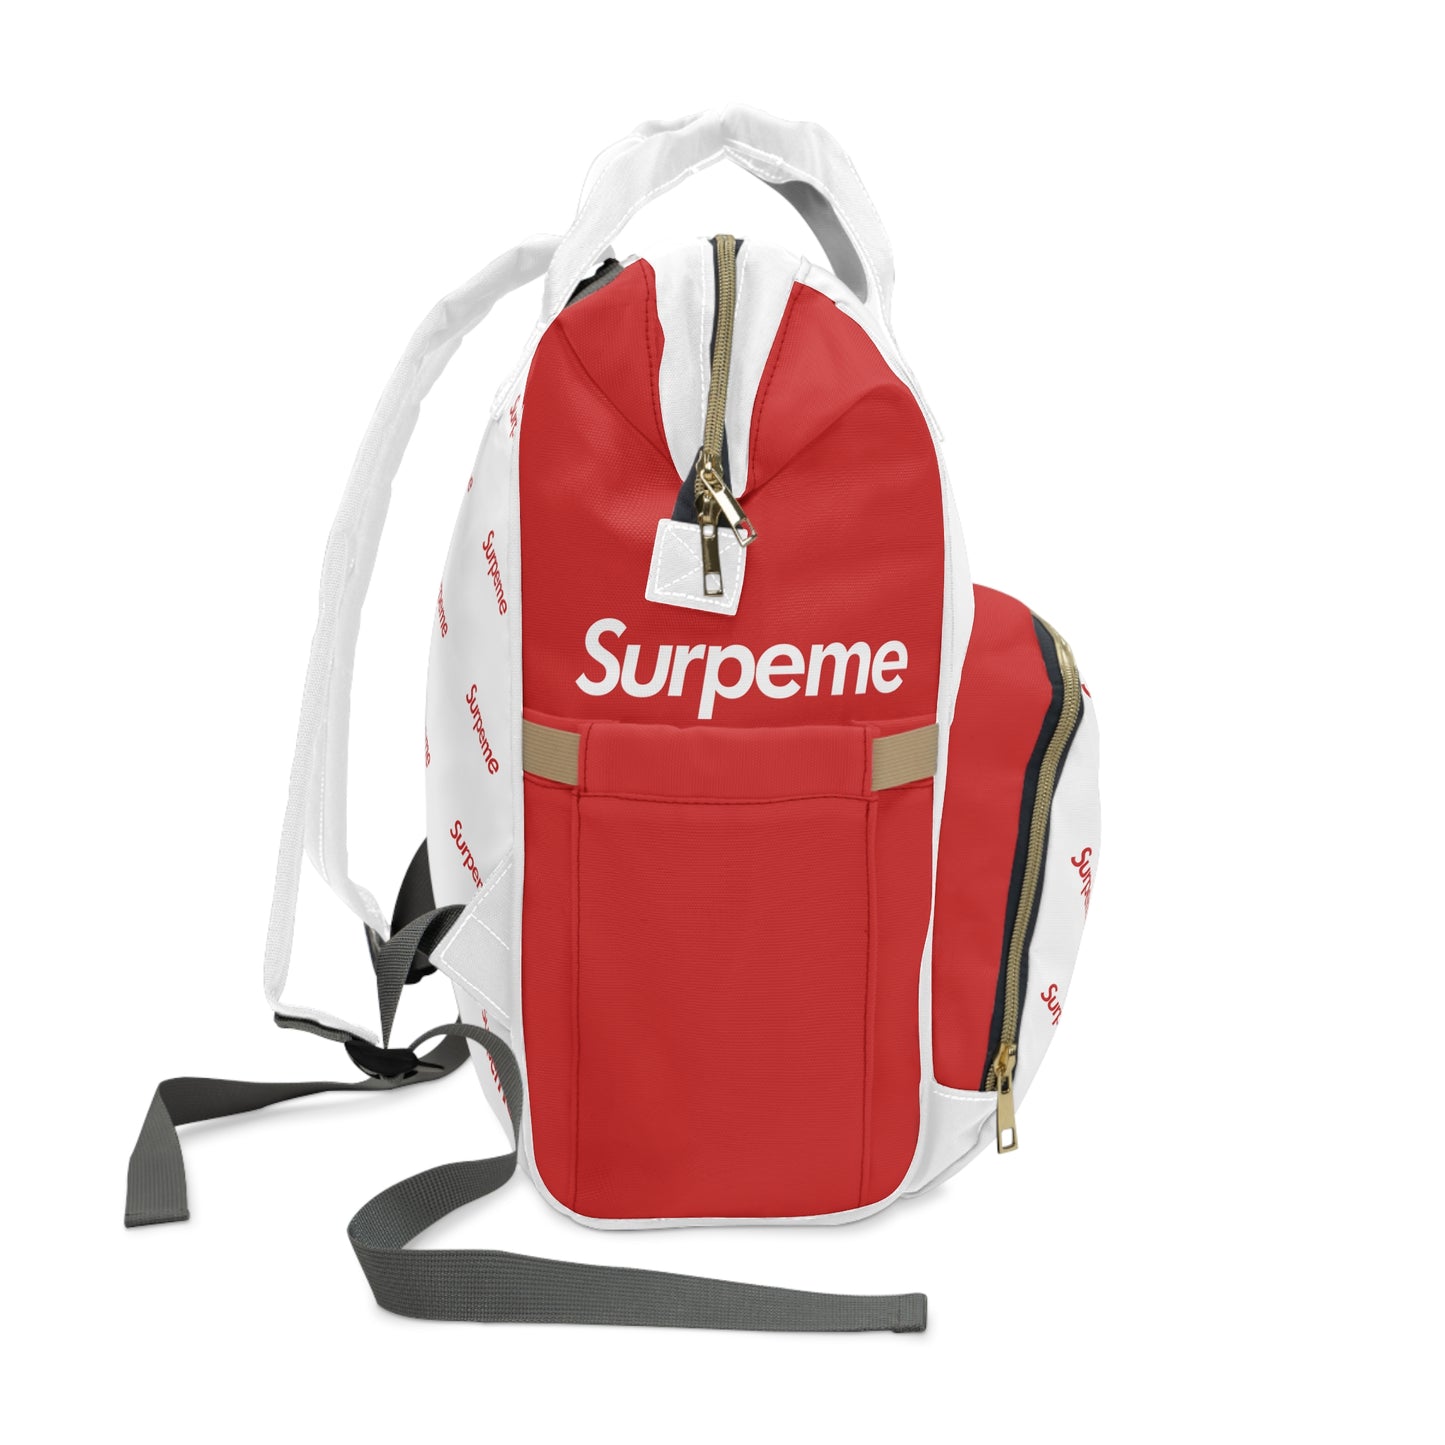 Surpeme Bag of Holding